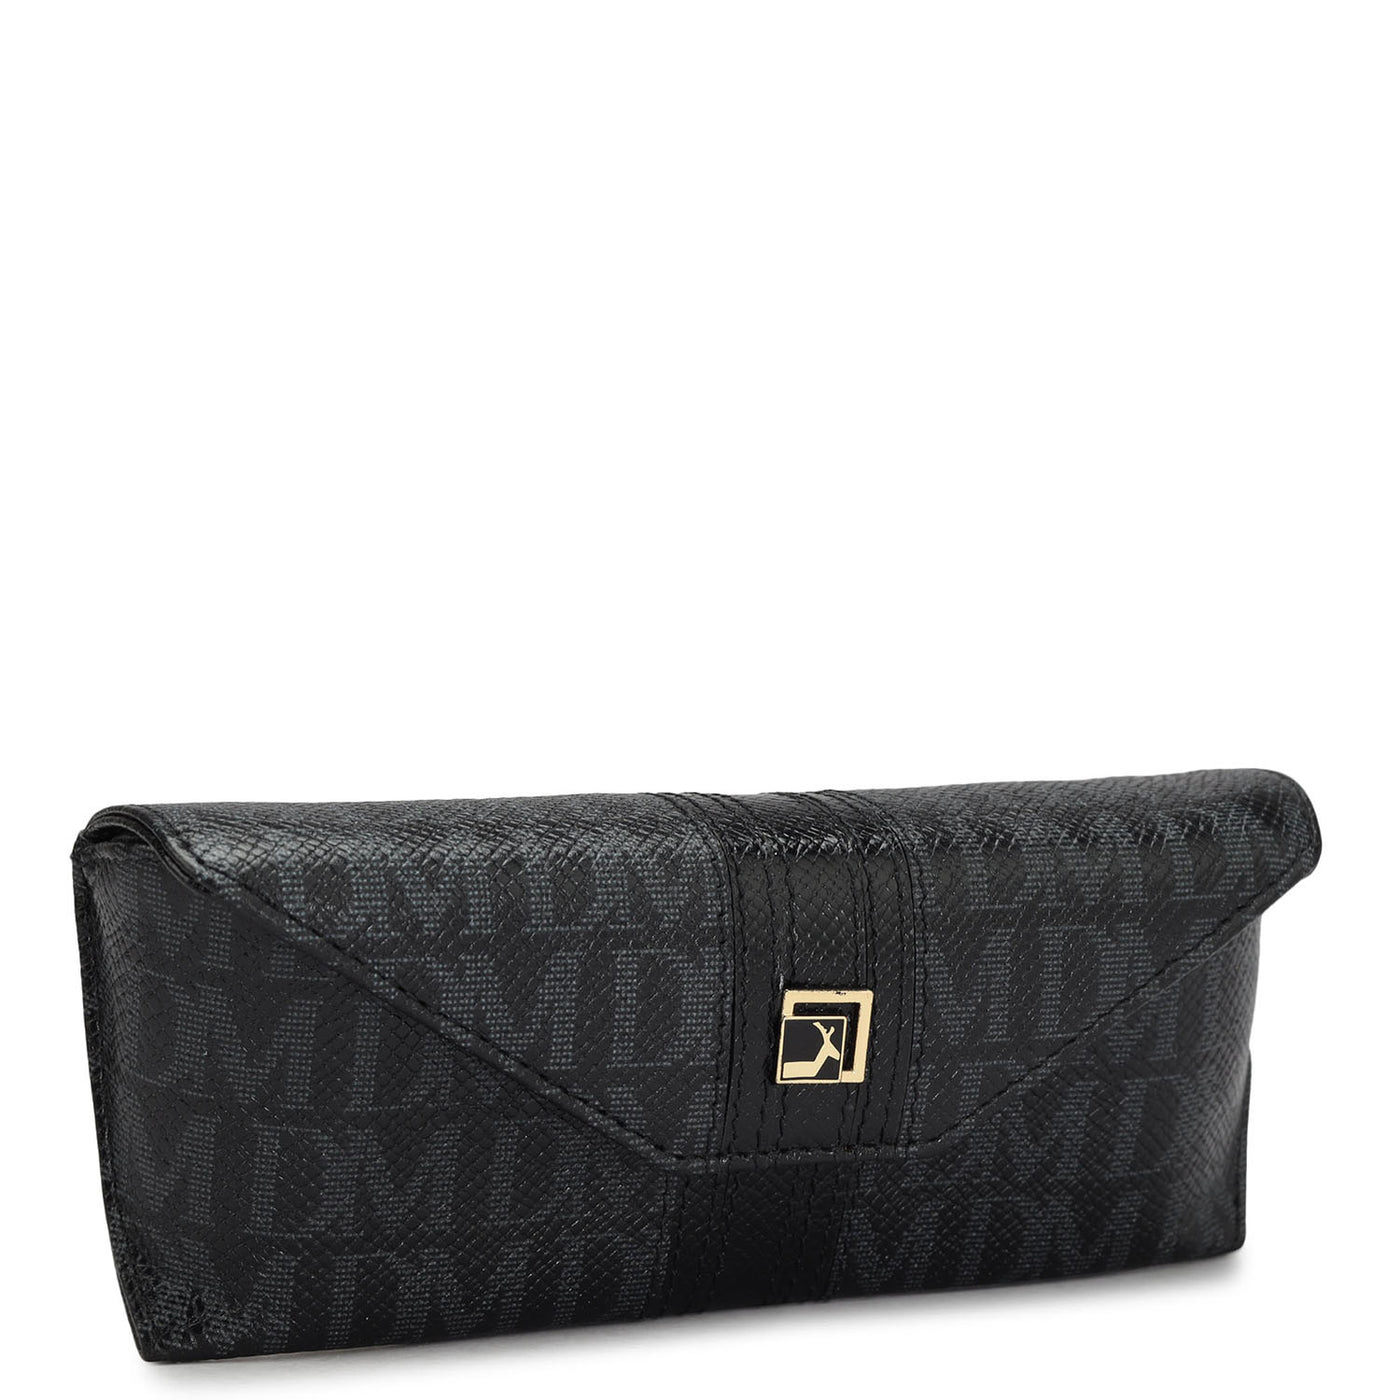 Monogram Franzy Leather Spectacle Case - Black